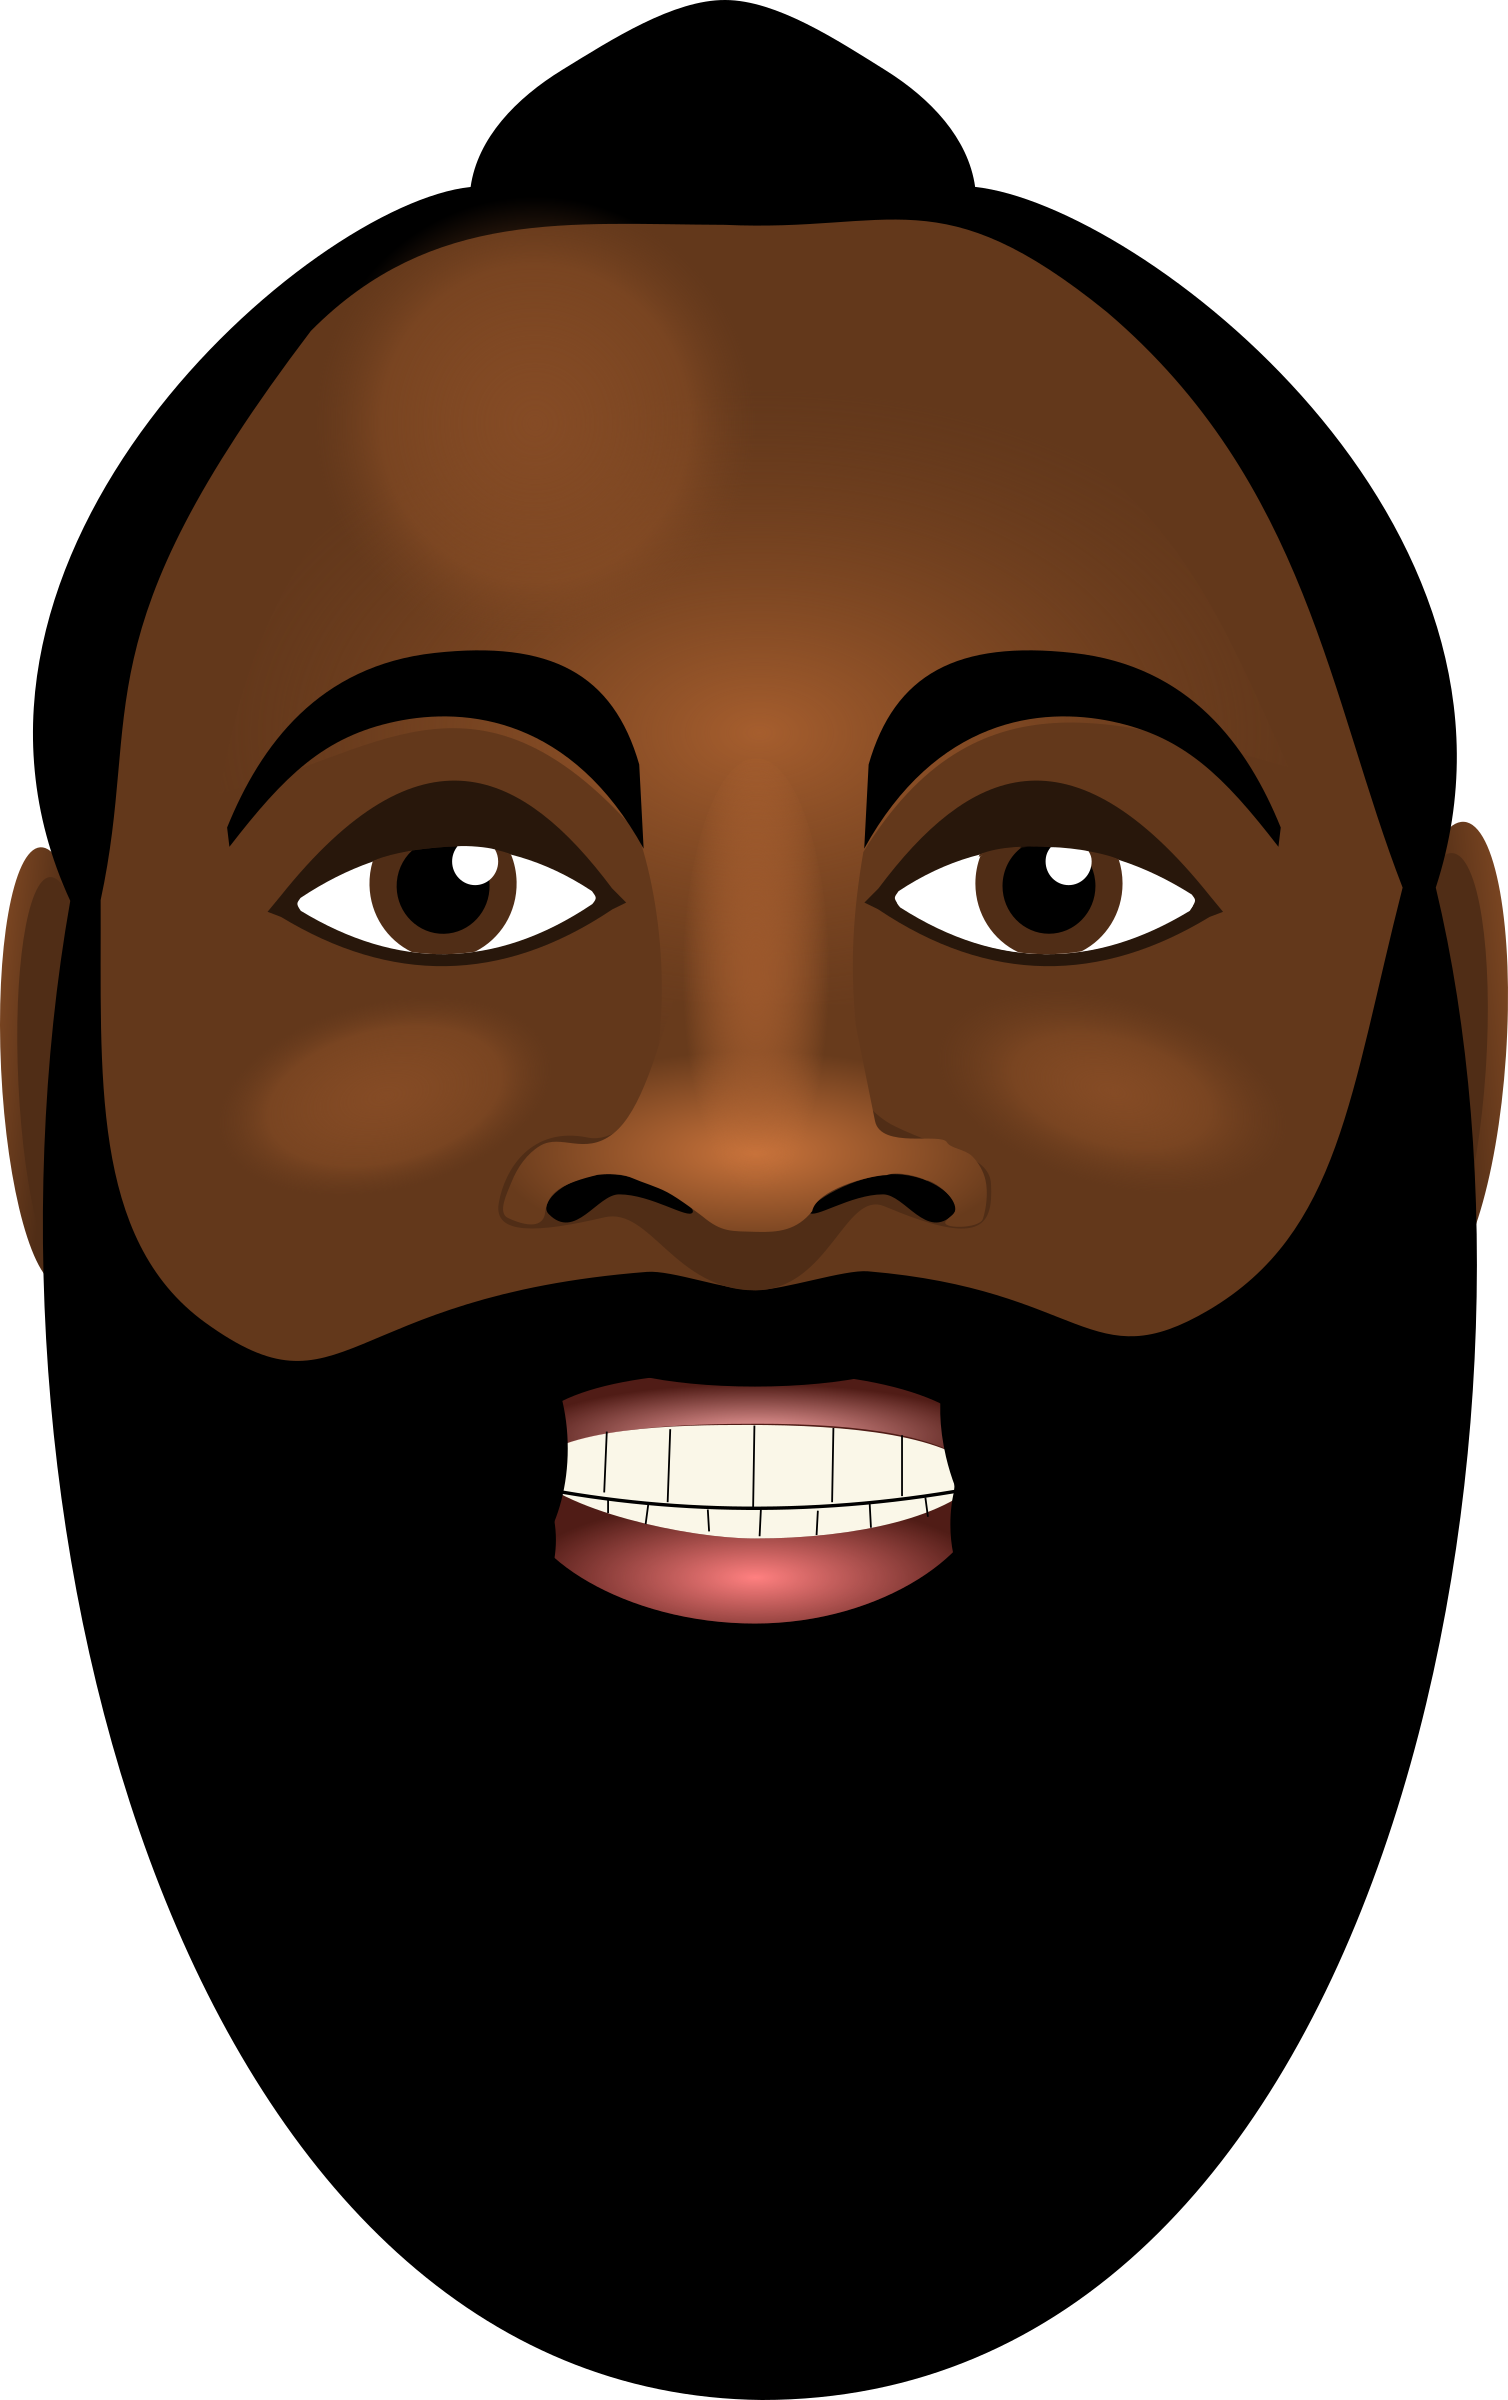 Beard And Mouth PNG Images Transparent Background | PNG Play